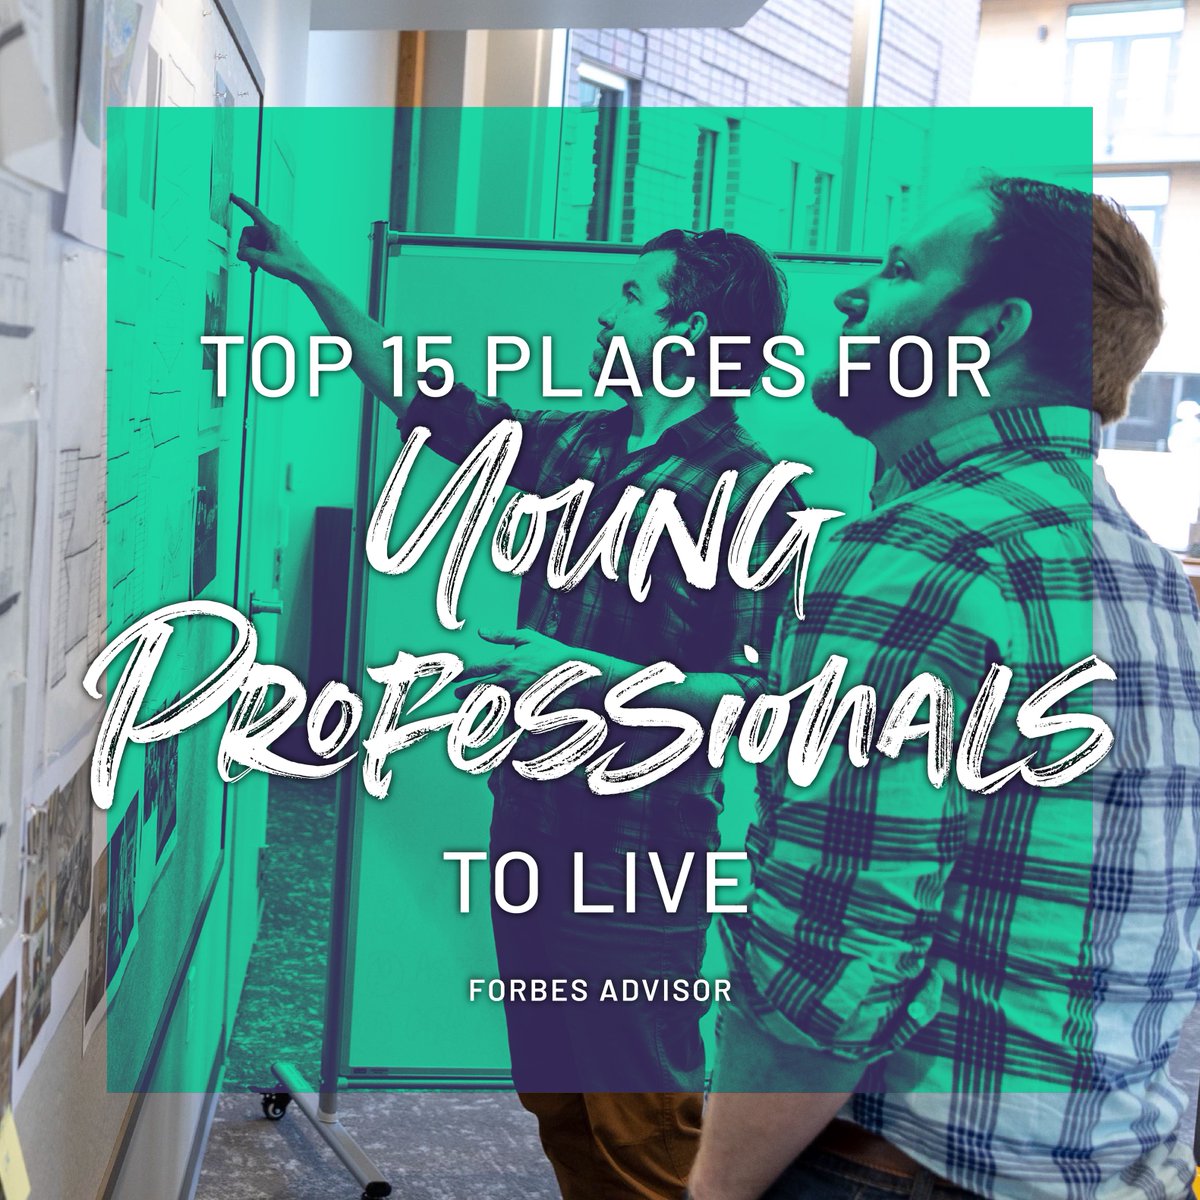 Wichita ranks in the top 15 places for young professionals to live, according to @ForbesAdvisor. #RelentlesslyOriginal View the list at bit.ly/458ap1B.